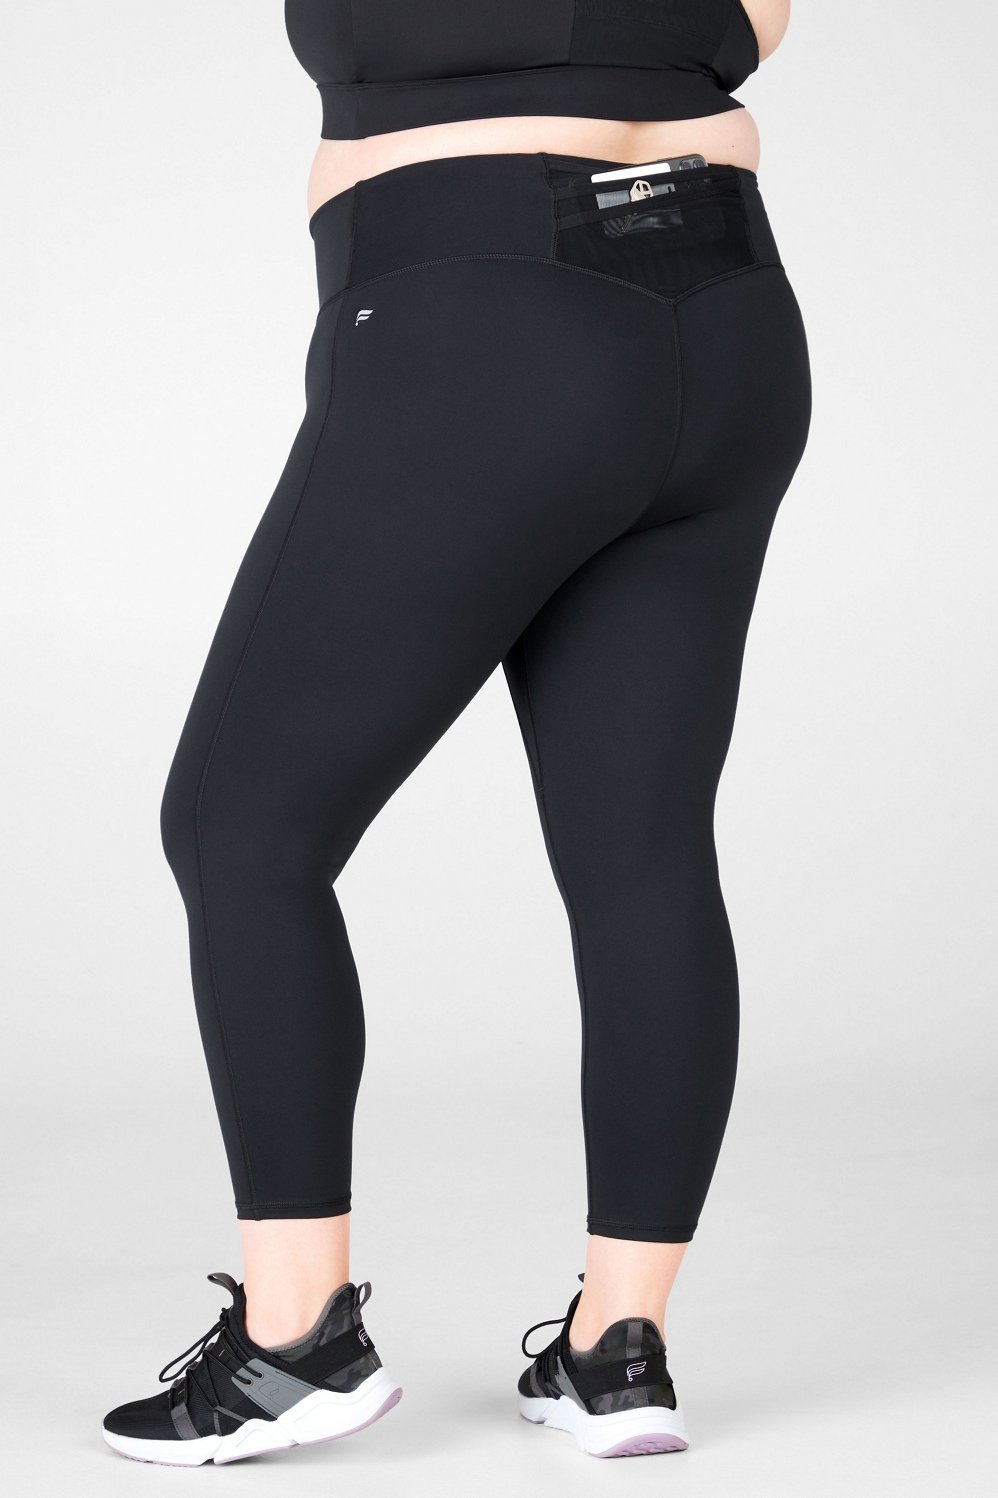 Fabletics Mila High-Waisted Pocket Capri in Neon, 2 for $24, 11 Pairs of  Neon Leggings That Are Totally Wearable (We Promise) - (Page 7)